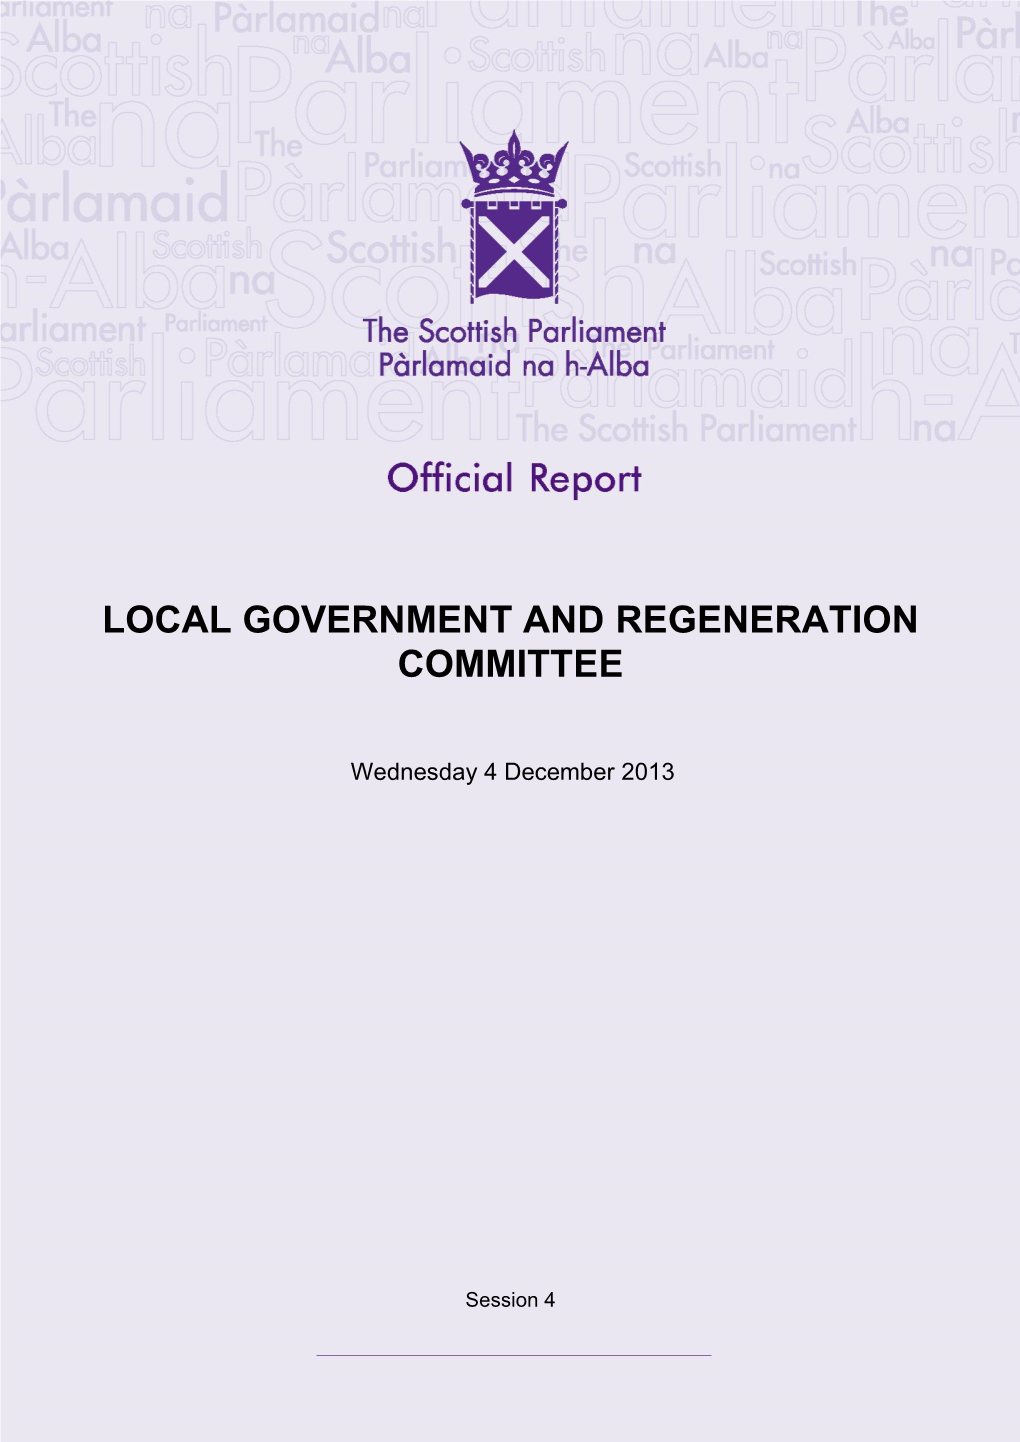 Local Government and Regeneration Committee